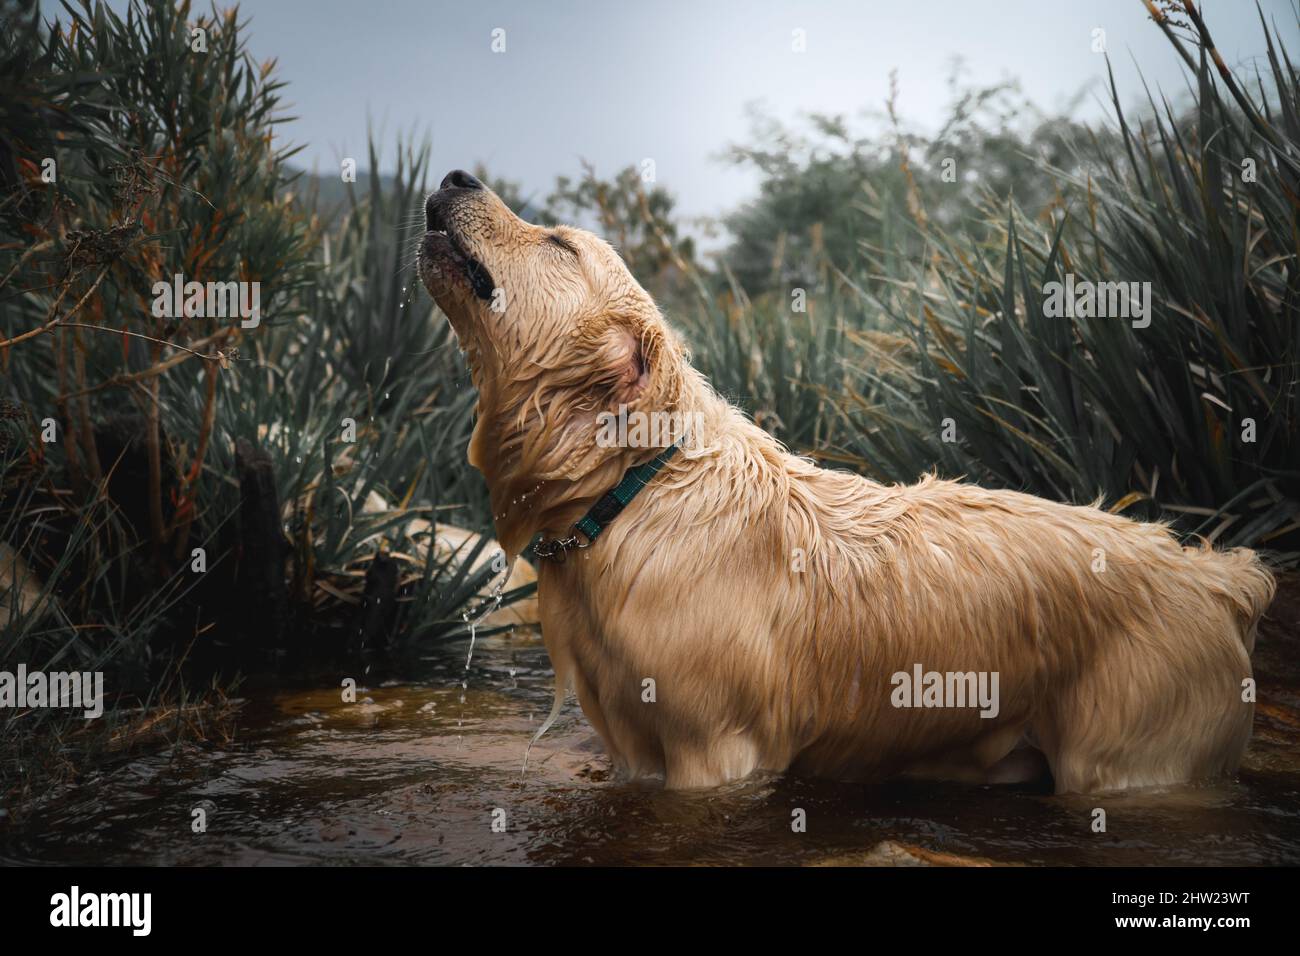 Golden retriever howing with excitment as he plays in the pond. beautiful dog in nature, retriever taking a swim. Stock Photo